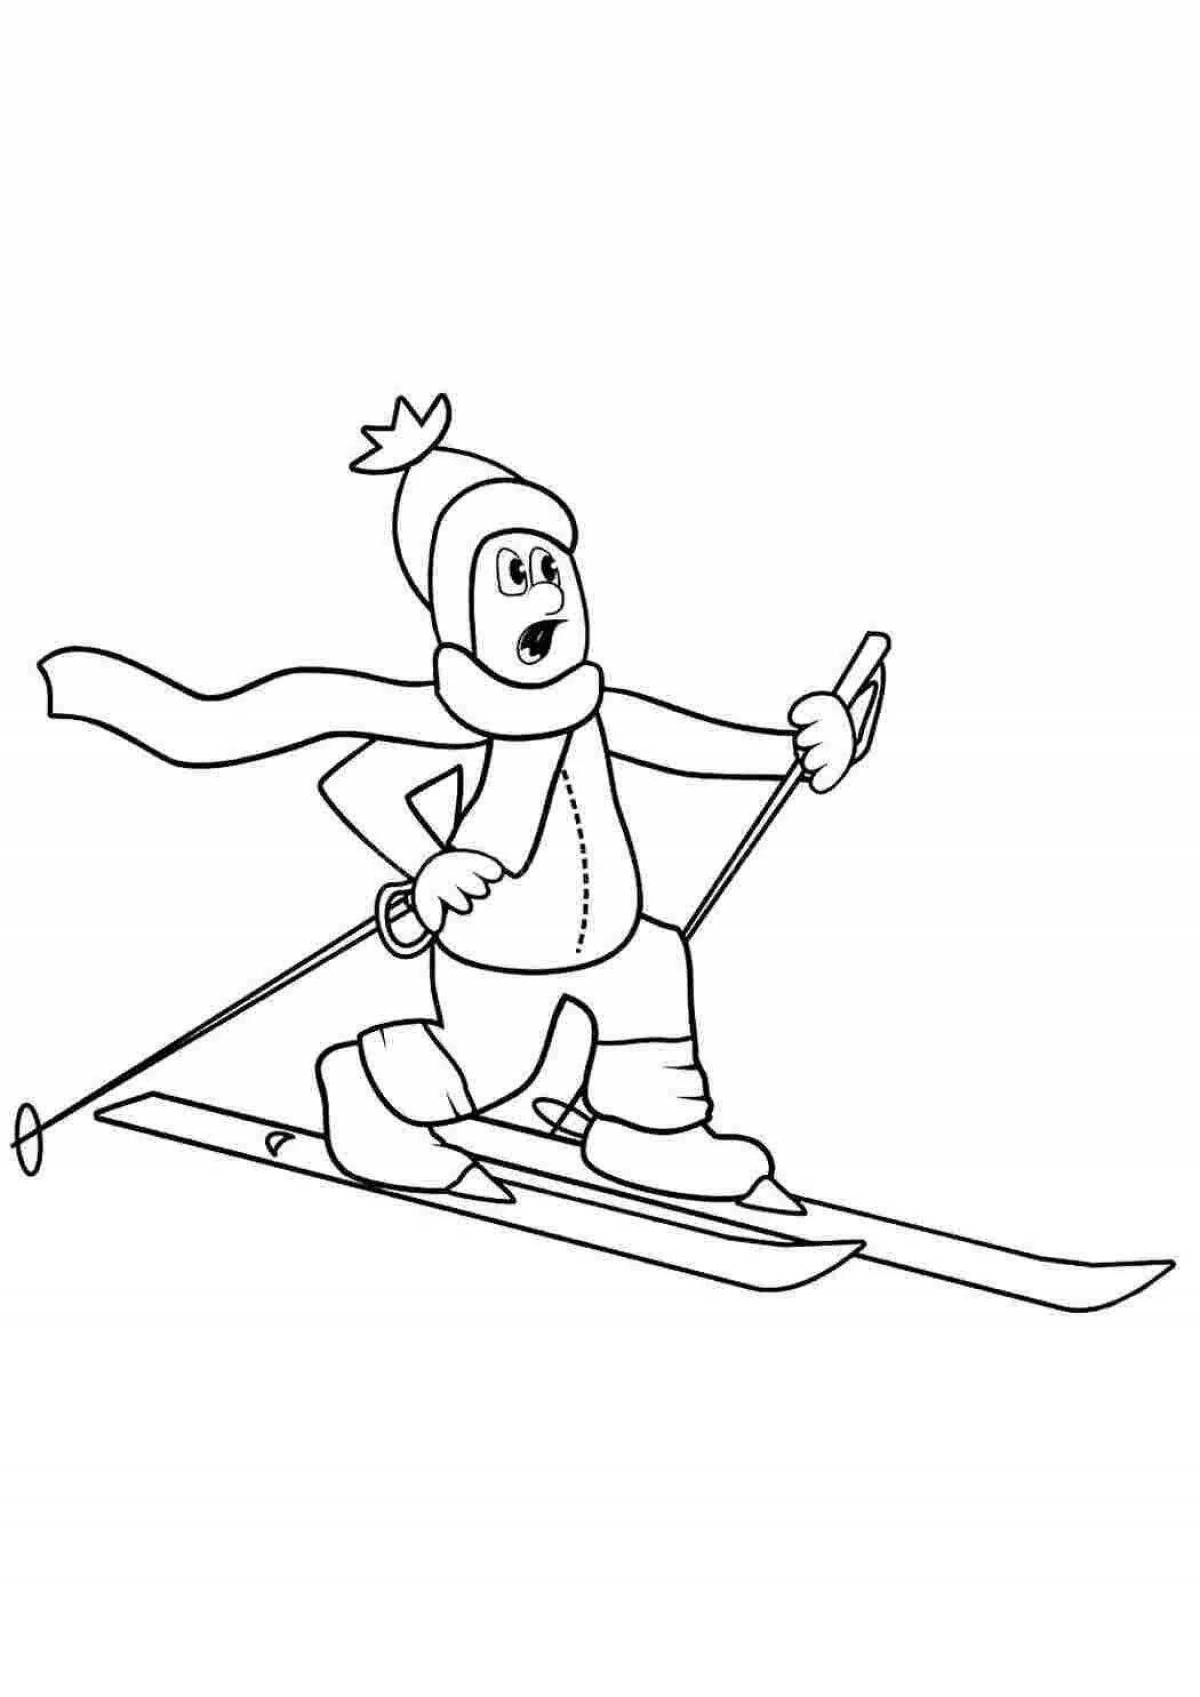 Colorful skier coloring book for kids